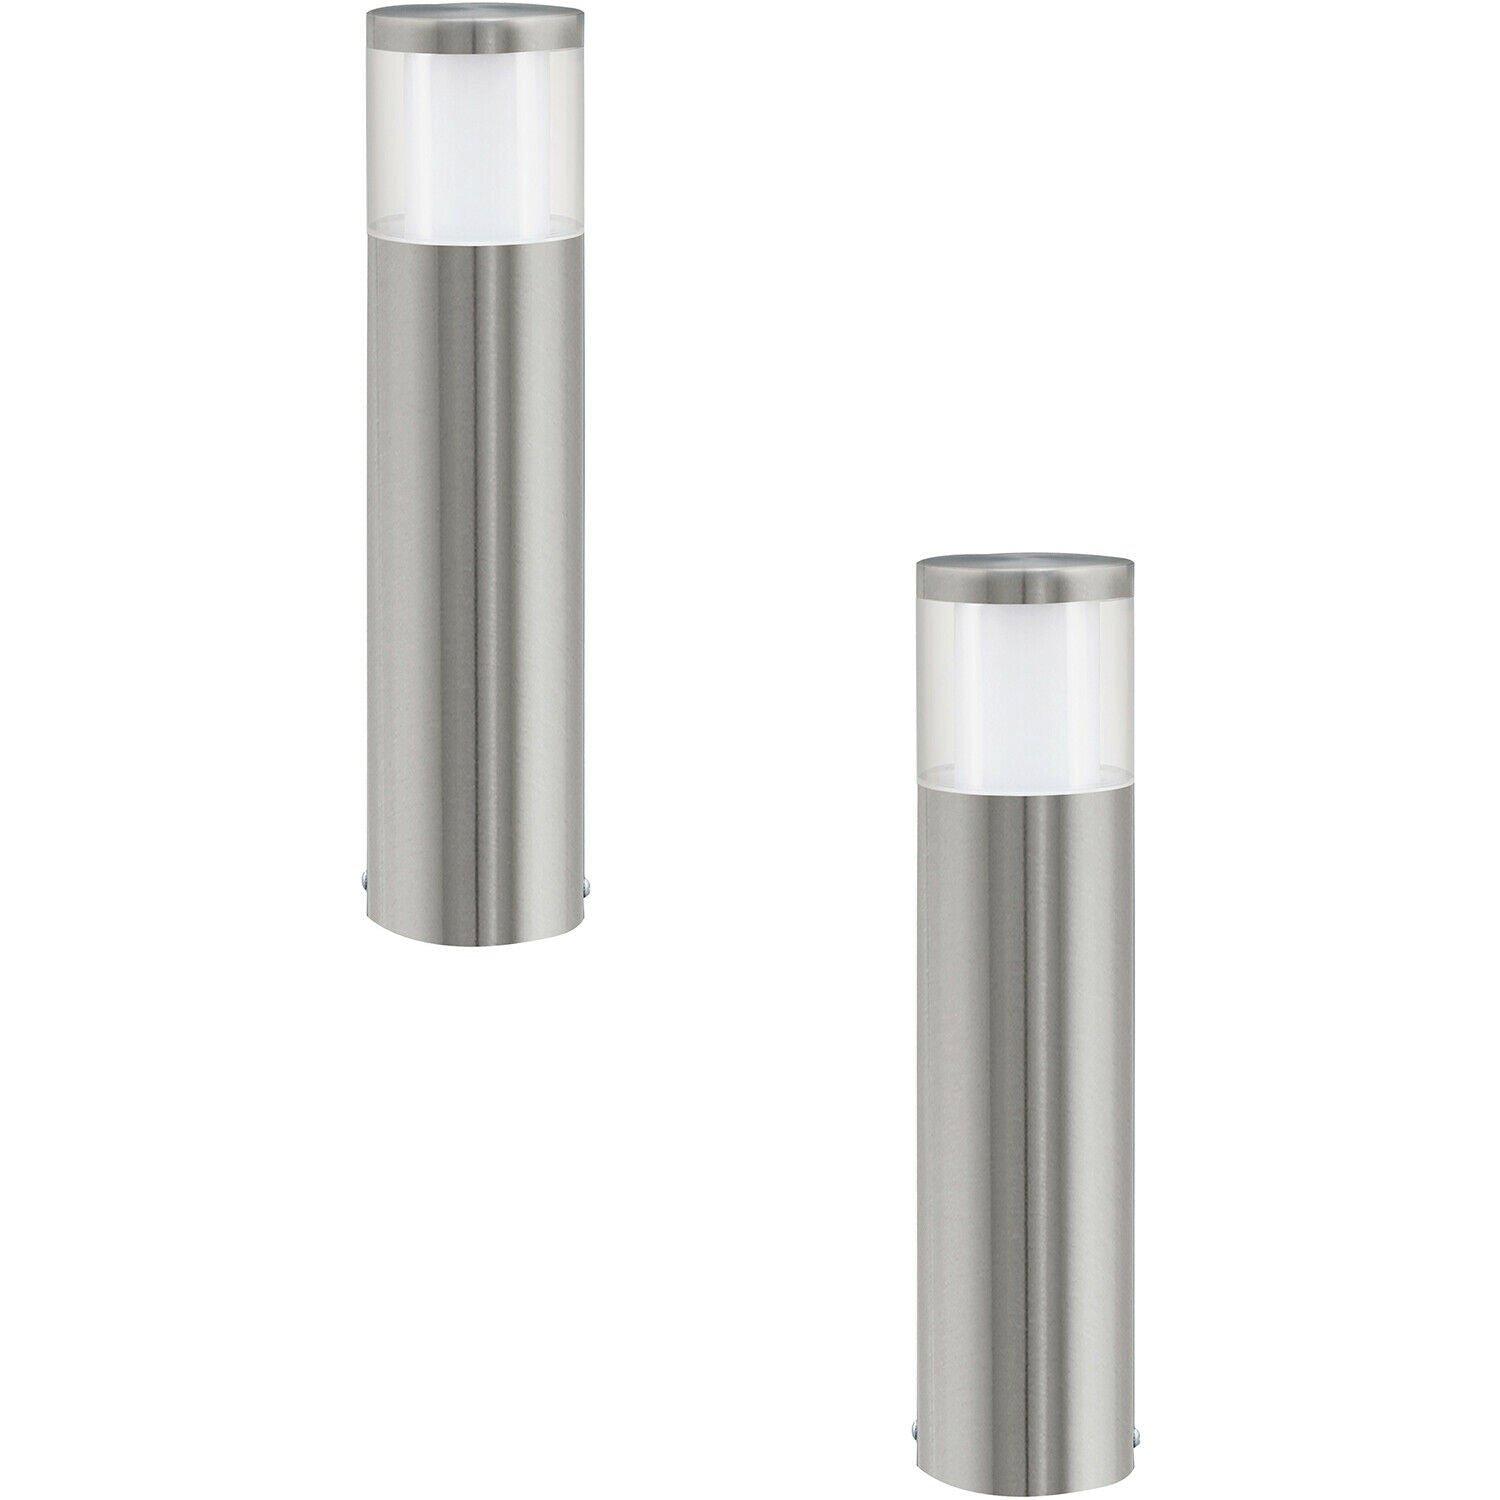 2 PACK IP44 Outdoor Pedestal Light Stainless Steel 3.7W LED Wall Post Lamp